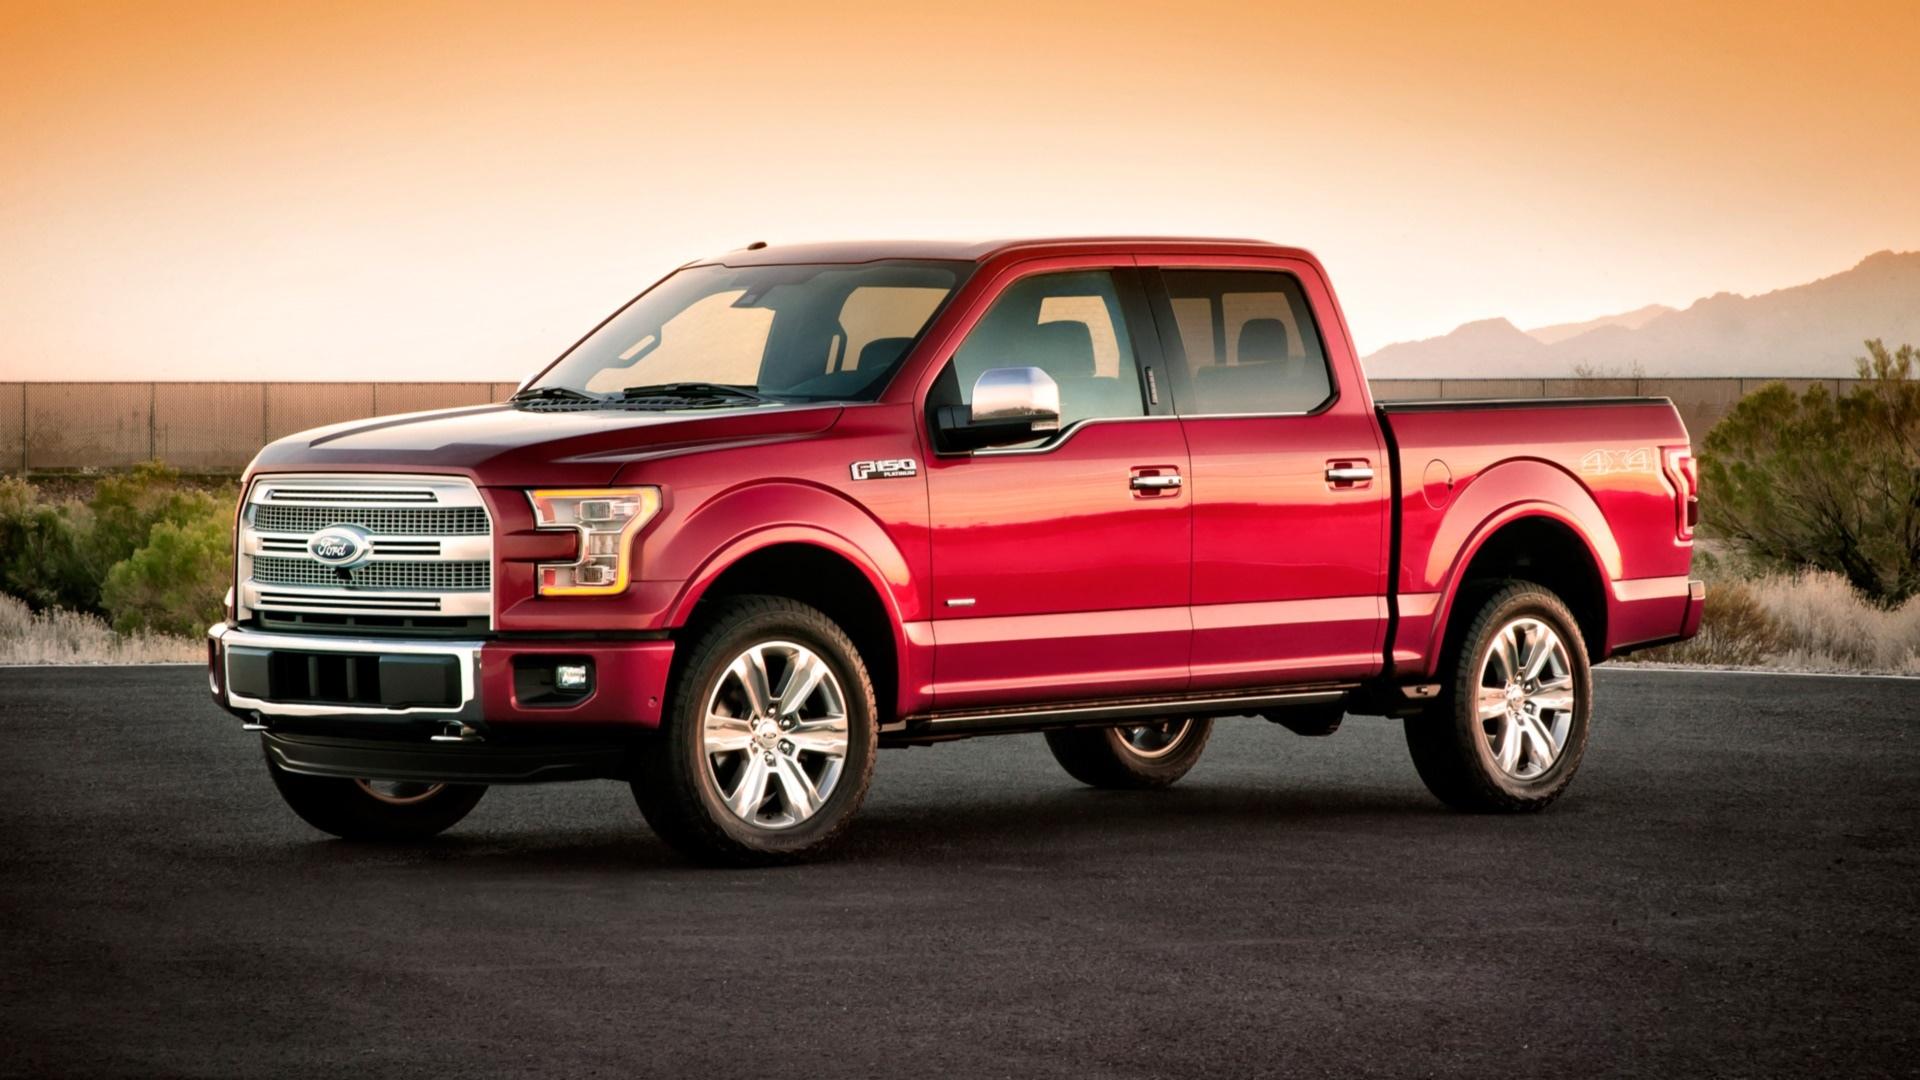 2015 Ford F-150 wallpapers HD quality